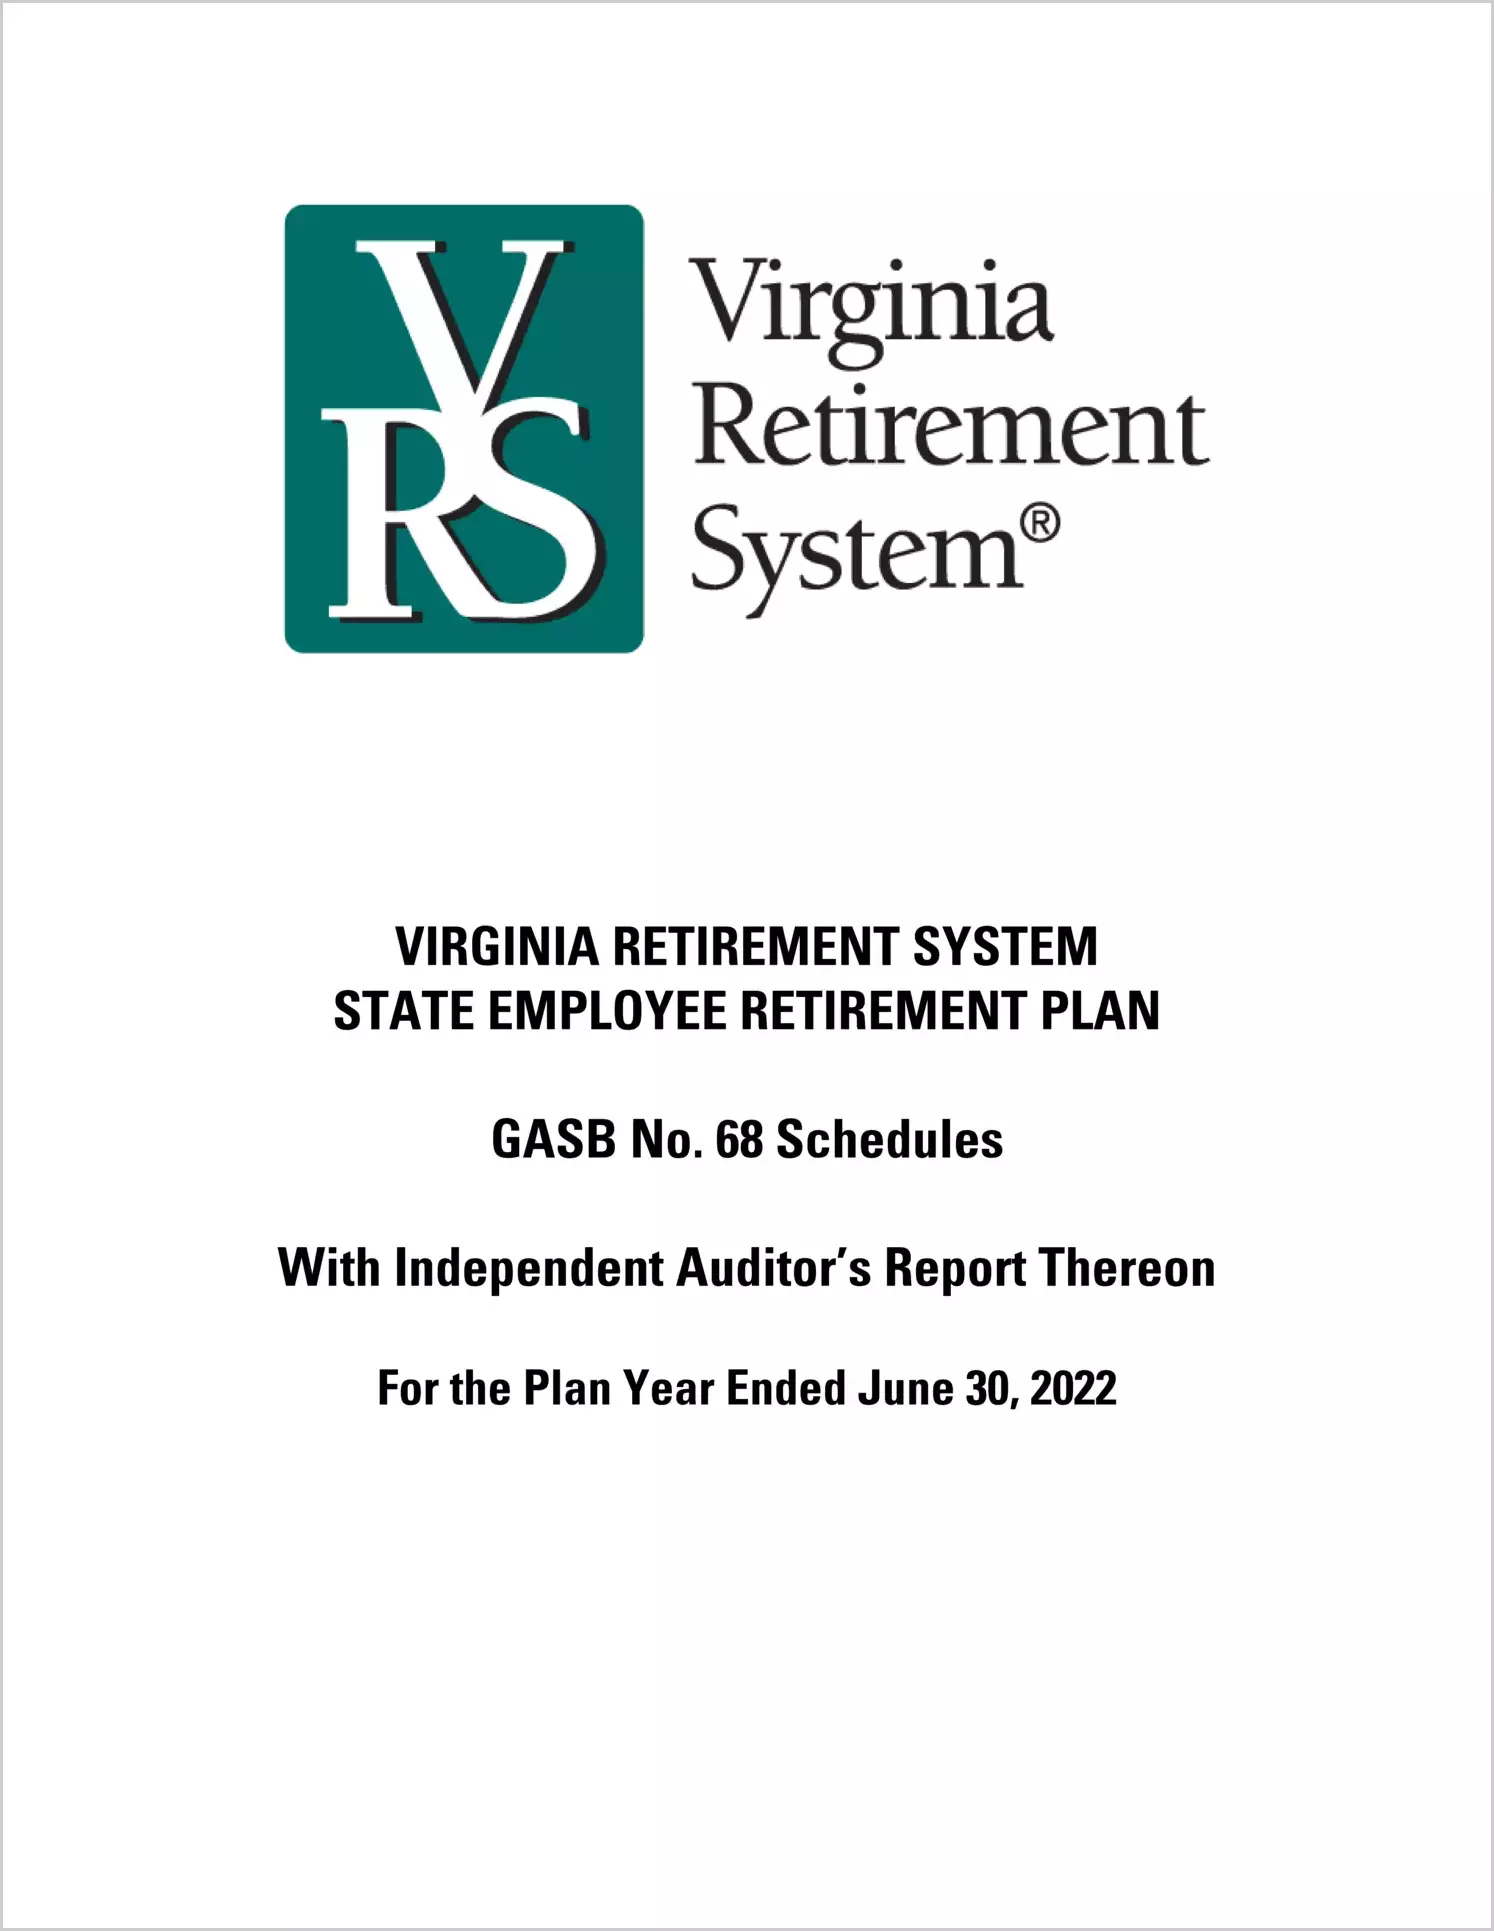 GASB 68 Virginia Retirement System State Employee Retirement Plan for the year ended June 30, 2022